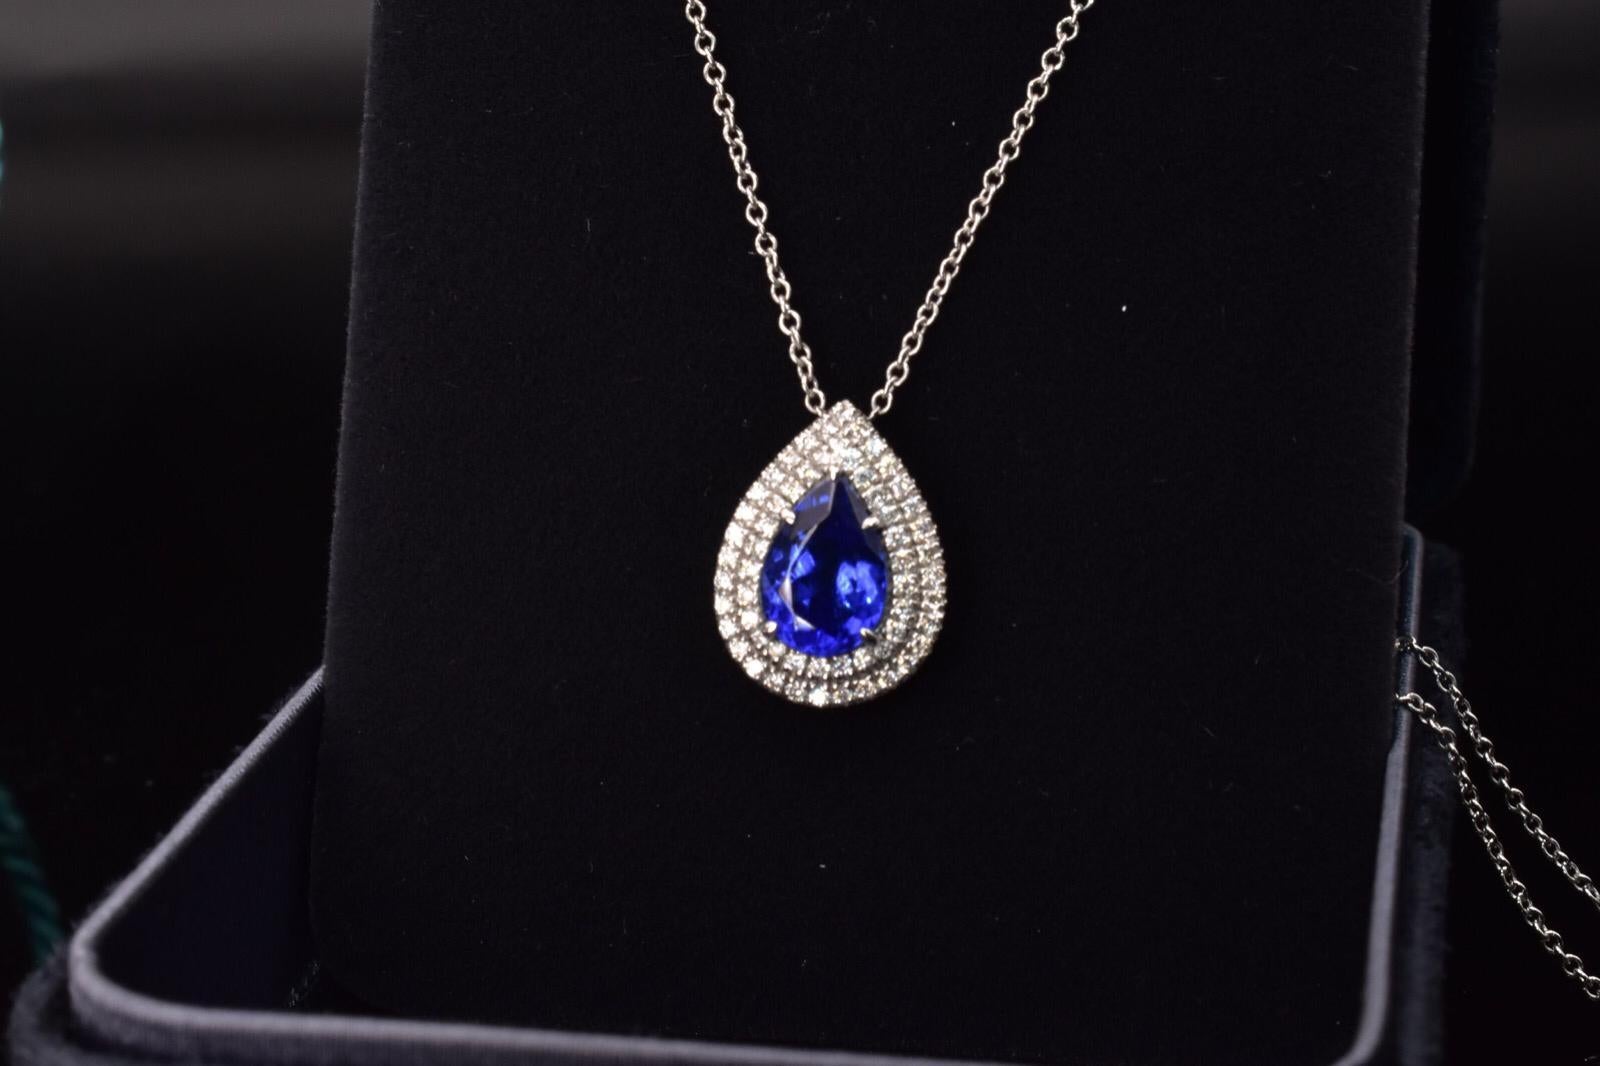 Tiffany Co Soleste Necklace with Tanzanite Tiffany Soleste Collection features vibrant center stone encircled by dazzling diamonds. Tiffany Soleste collection takes its name from “sol,” the Spanish word for sun. The vivid spectrum of magnificent